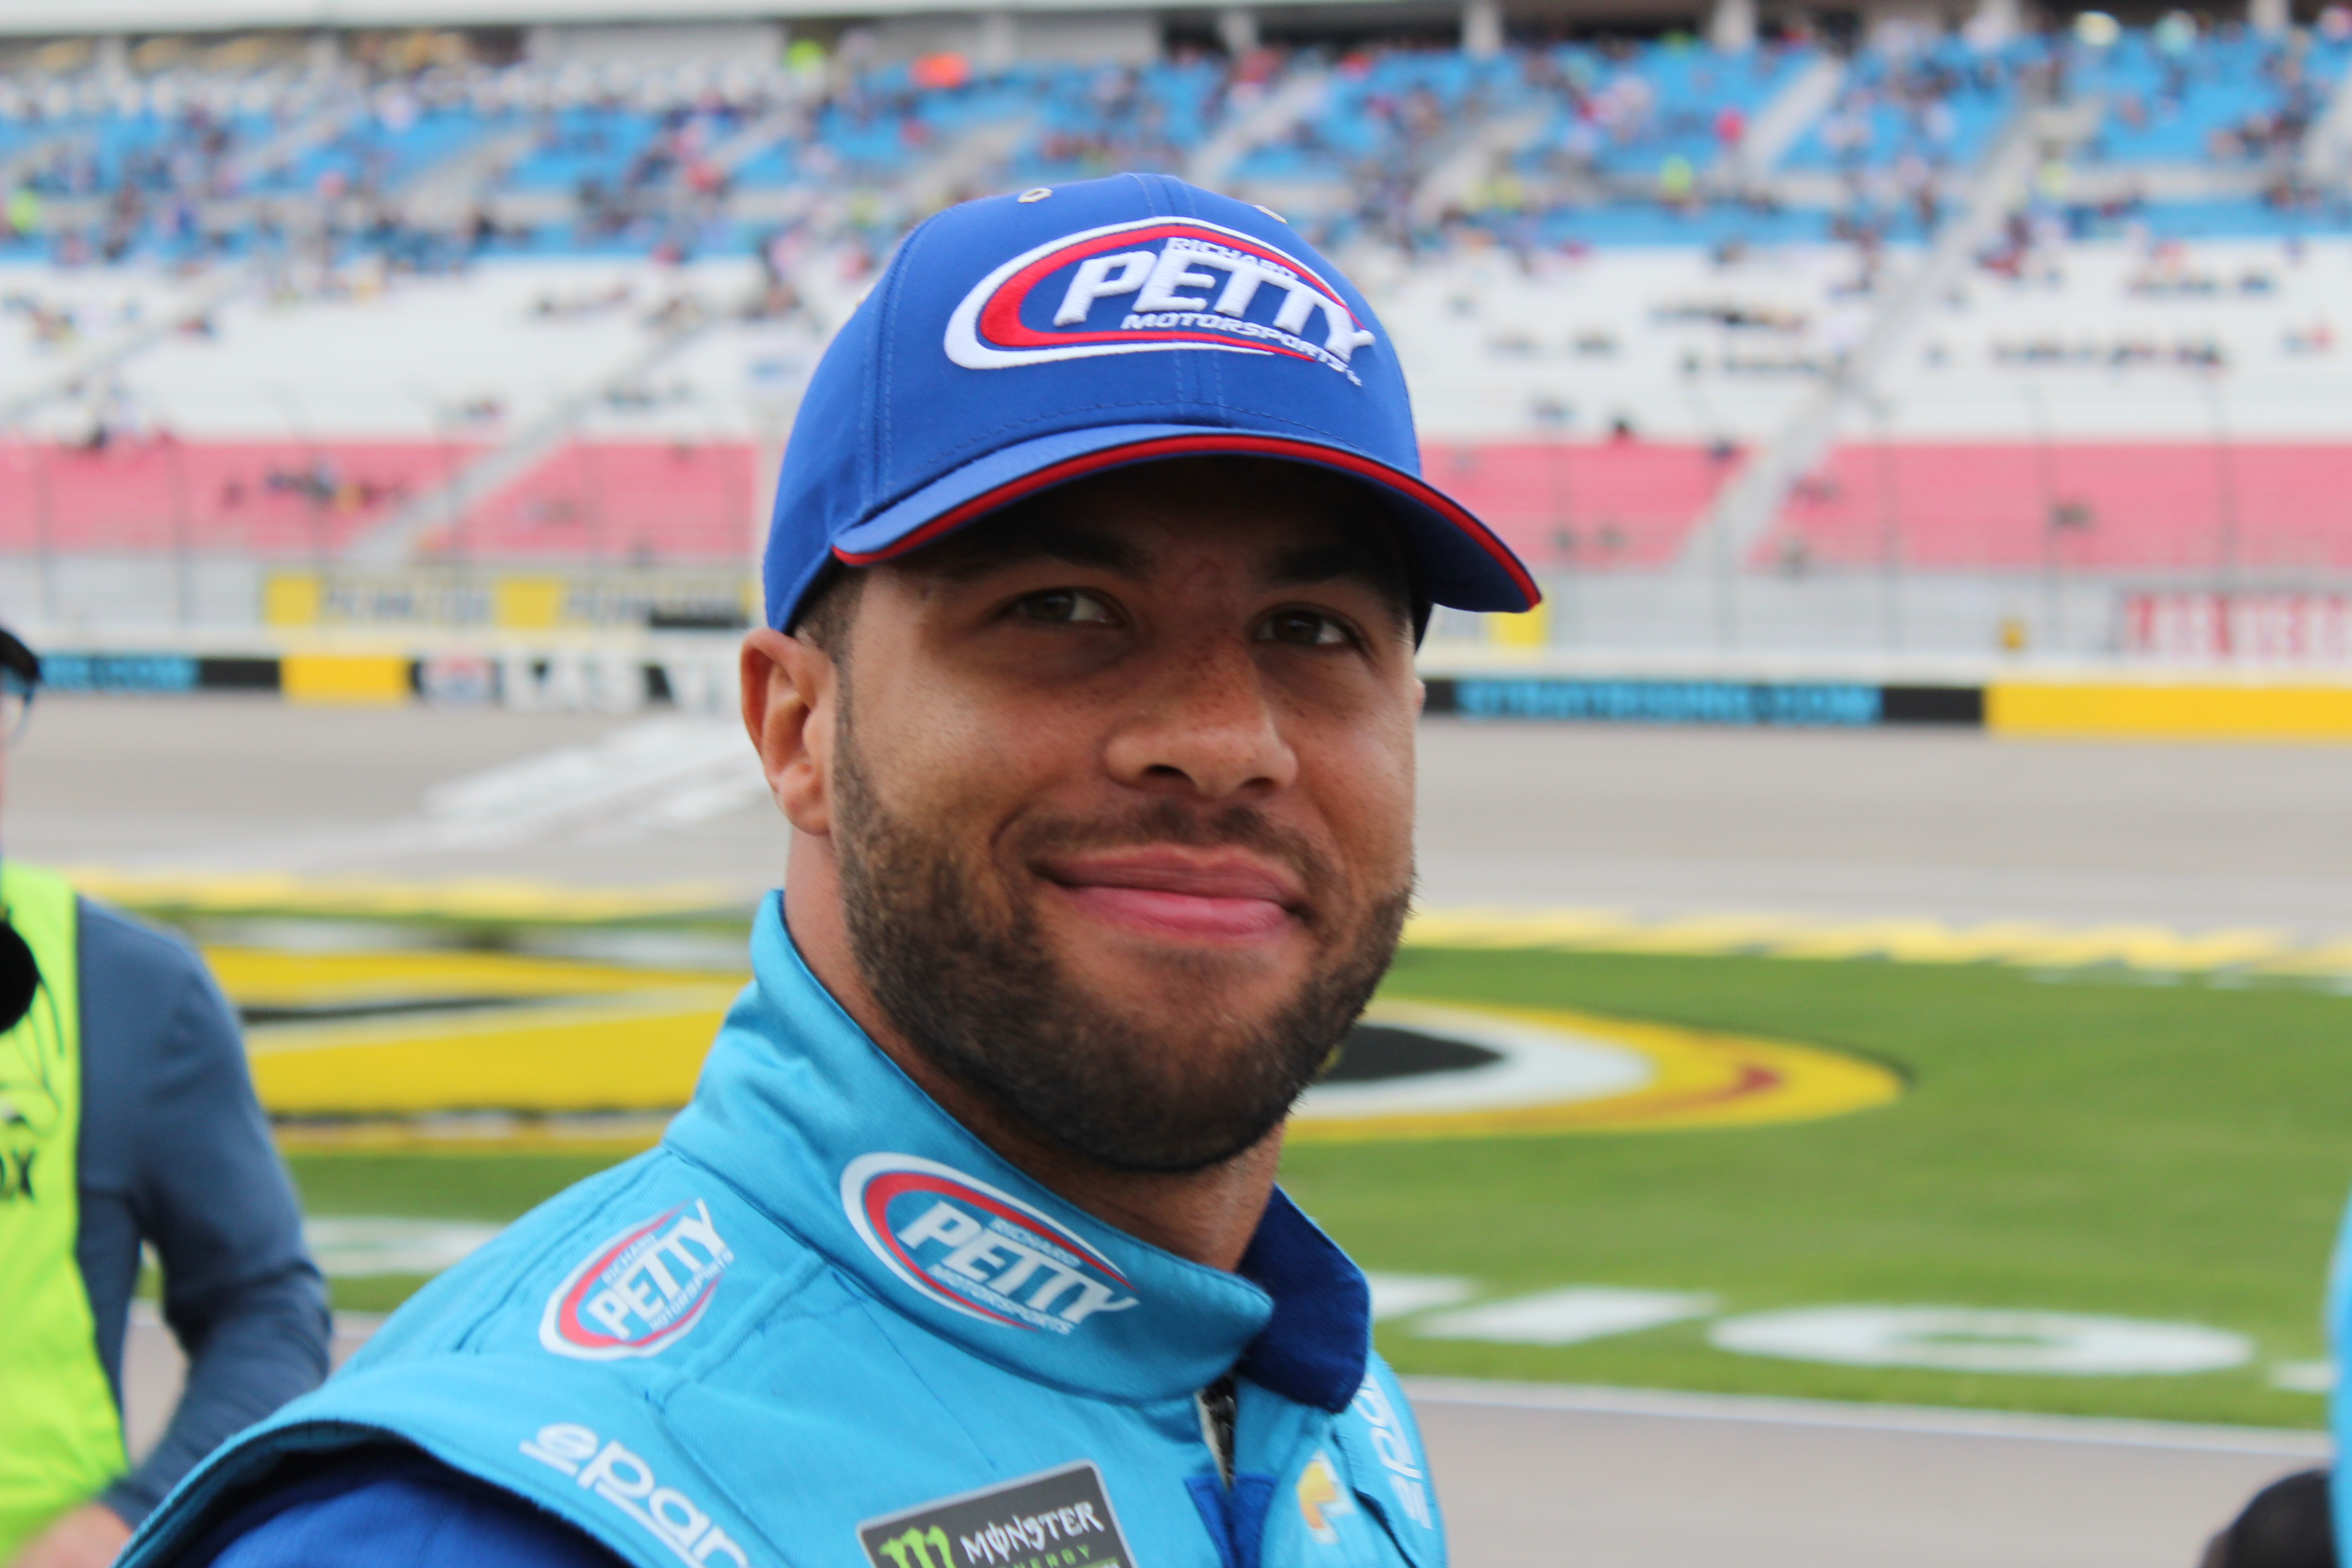 Resilient and optimistic, Bubba Wallace keeps his head up with his No. 43 team's progress. (Photo Credit: Jose L. Acero Jr/TPF)